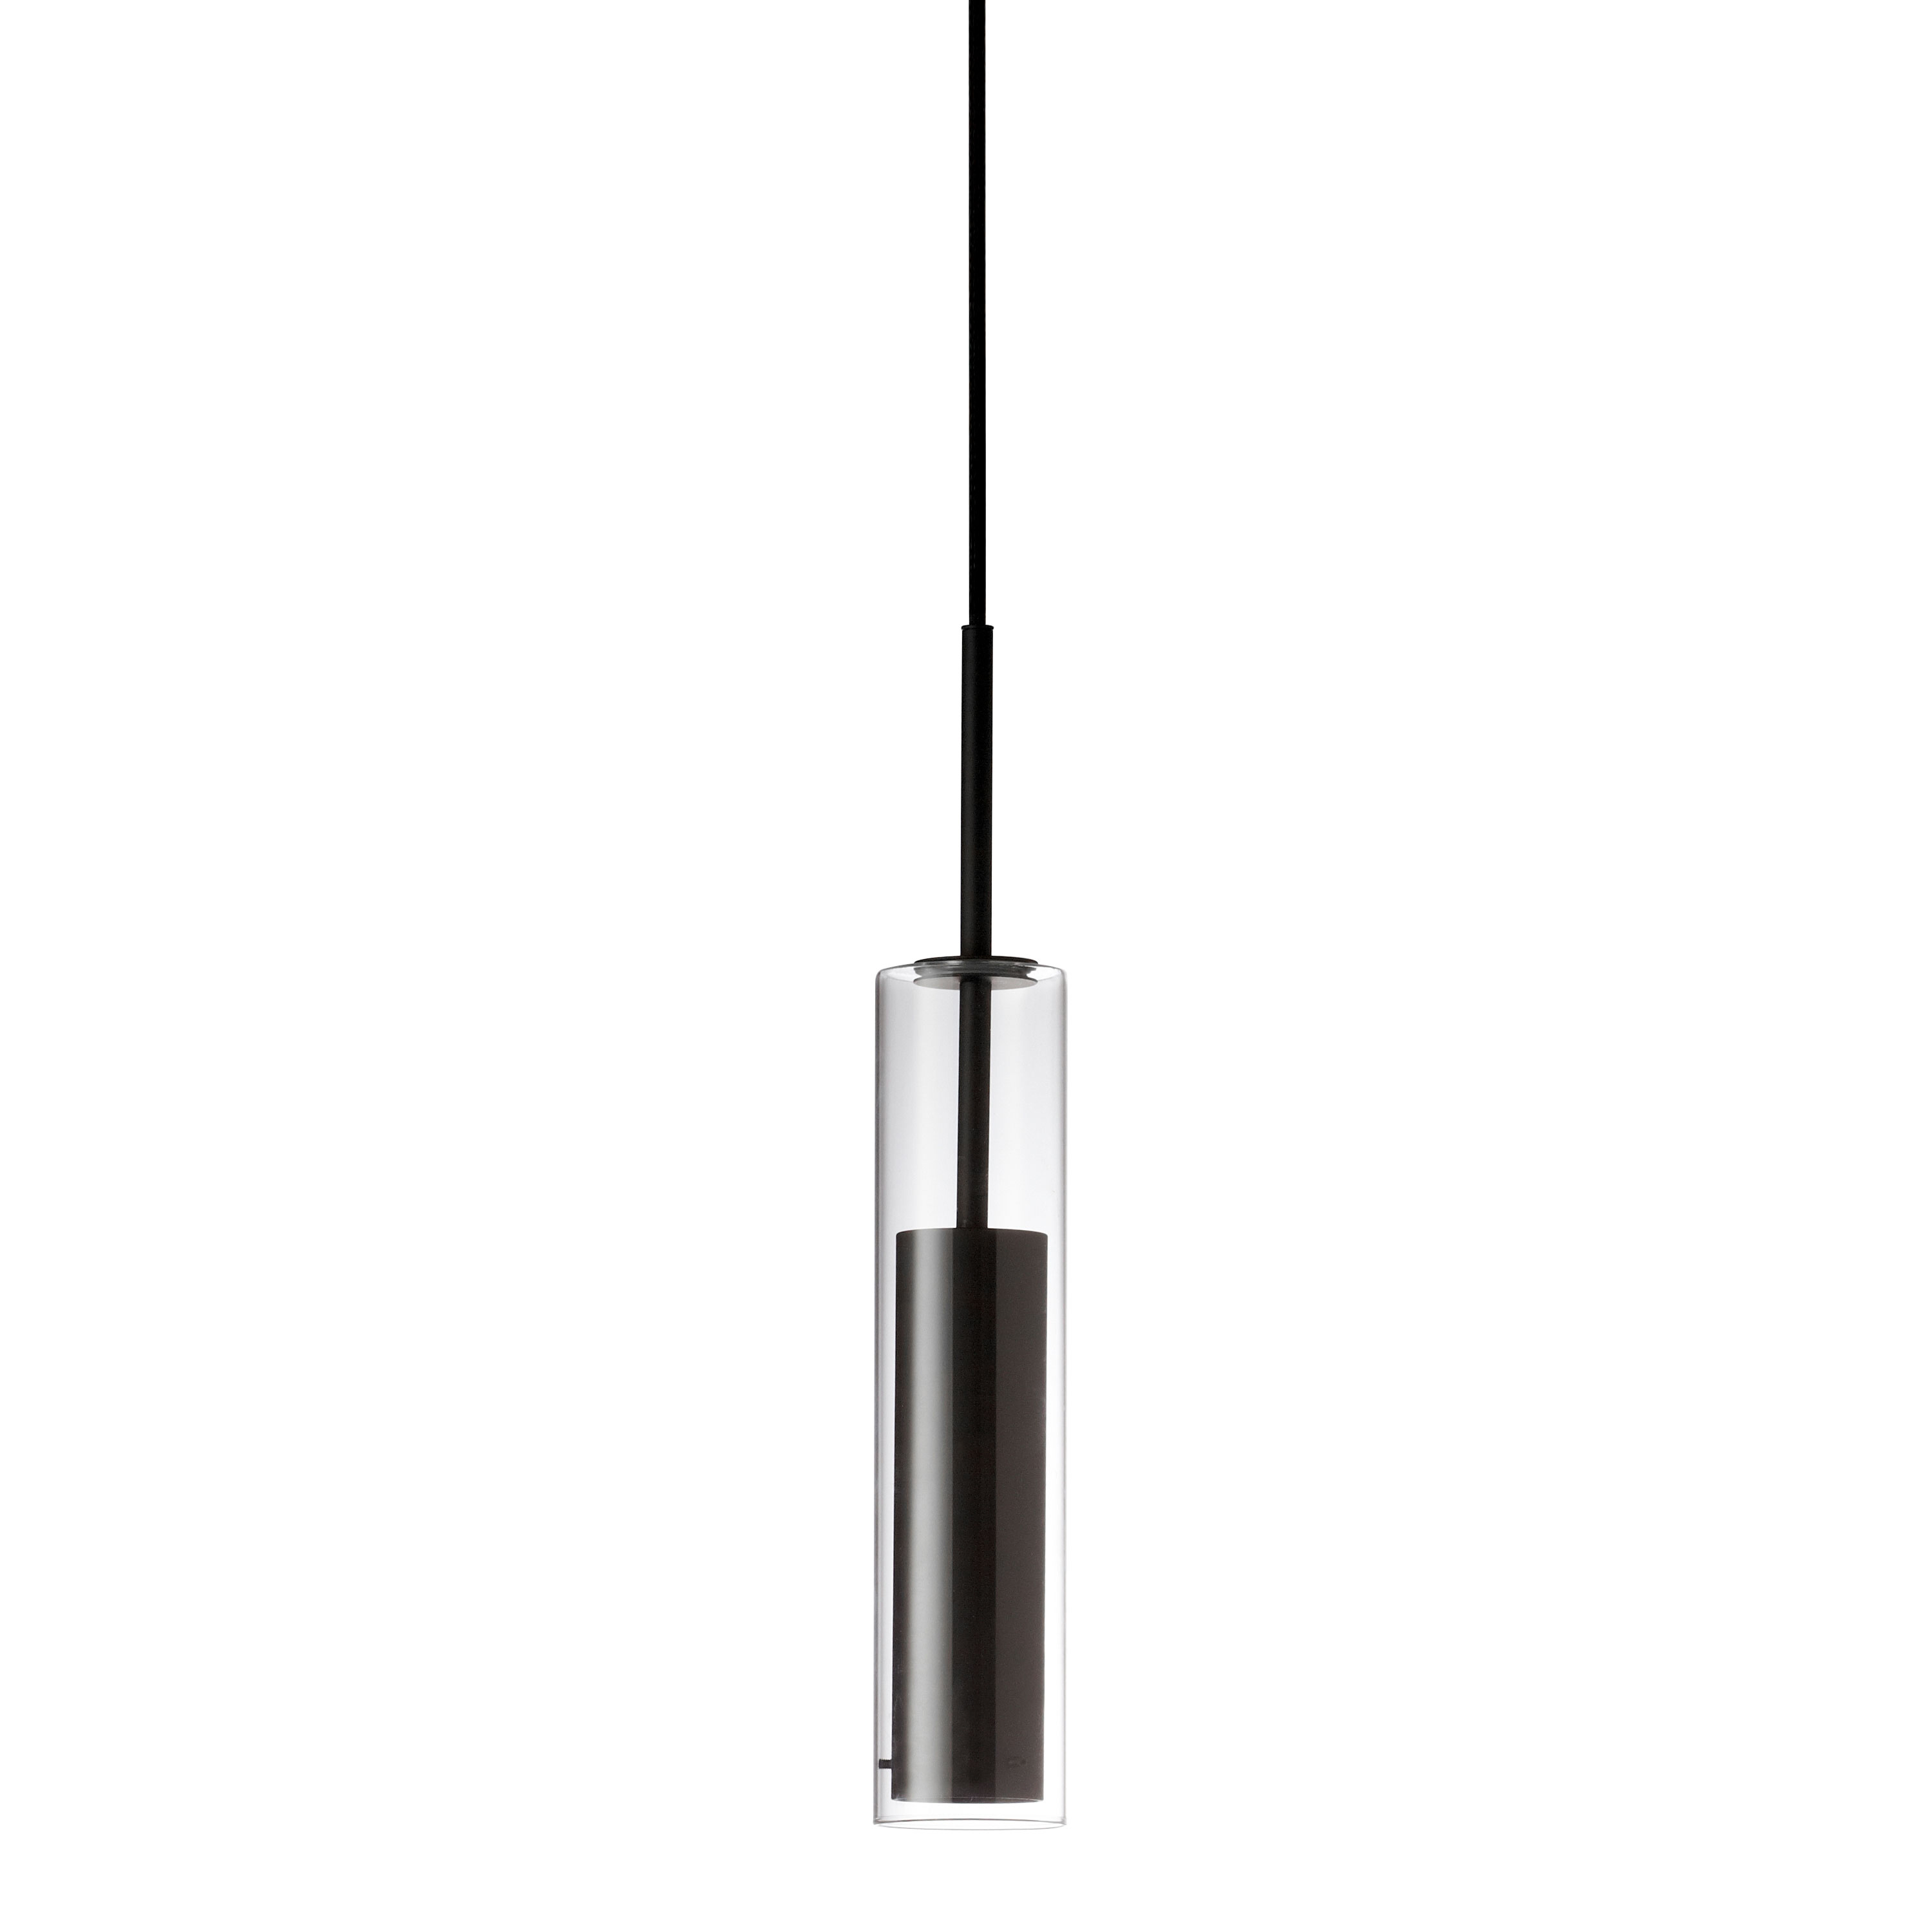 Luna lighting creates a focal point of modern design wherever you place it in your home. Its smooth, sleek lines will blend with any modern or contemporary design schemes, including minimalist décor. The metal frame drops to a cylindrical housing for the lighting, effectively encased in a clear class cylindrical housing. Optional metal finishes allow you to create looks from sleek to dramatically stylish. Luna lighting, with its elegant yet modest profile, is perfect for hallways, kitchen and dining rooms.